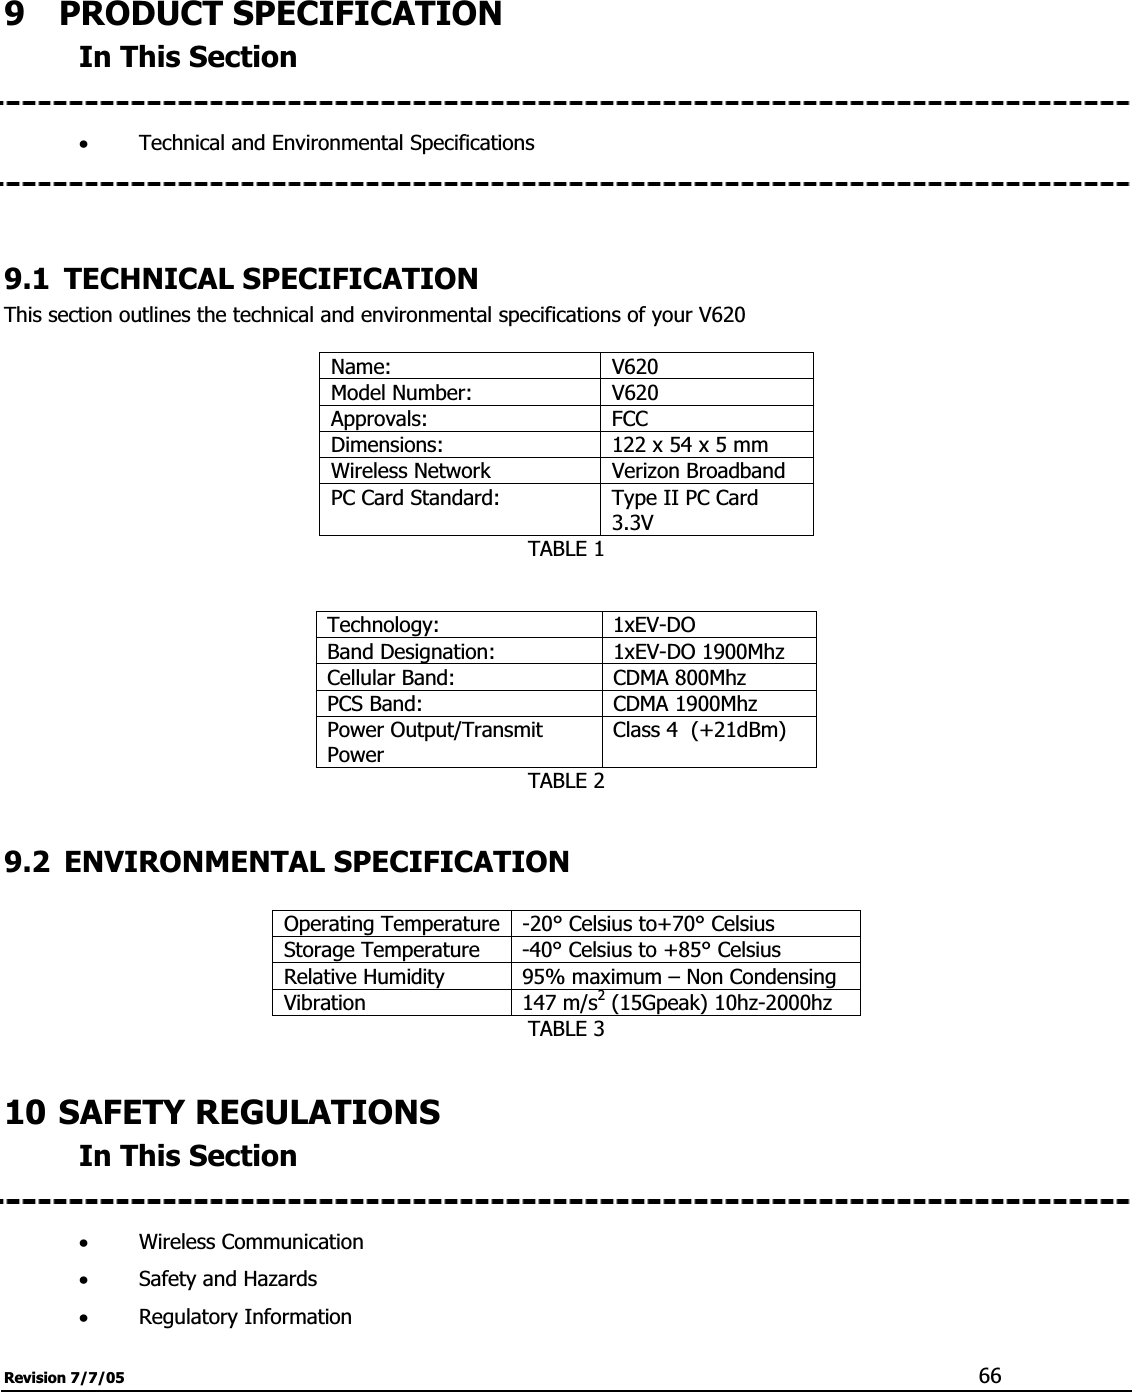 Revision 7/7/05  669  PRODUCT SPECIFICATION In This Section xTechnical and Environmental Specifications  9.1 TECHNICAL SPECIFICATION This section outlines the technical and environmental specifications of your V620 Name: V620 Model Number:  V620 Approvals: FCC  Dimensions:  122 x 54 x 5 mm Wireless Network  Verizon Broadband PC Card Standard:  Type II PC Card 3.3VTABLE 1 Technology: 1xEV-DO Band Designation:  1xEV-DO 1900Mhz Cellular Band:  CDMA 800Mhz PCS Band:  CDMA 1900Mhz Power Output/Transmit PowerClass 4  (+21dBm) TABLE 2 9.2 ENVIRONMENTAL SPECIFICATION Operating Temperature -20° Celsius to+70° Celsius Storage Temperature  -40° Celsius to +85° Celsius Relative Humidity  95% maximum – Non Condensing Vibration 147 m/s2 (15Gpeak) 10hz-2000hz TABLE 3 10 SAFETY REGULATIONS In This Section xWireless Communication xSafety and Hazards xRegulatory Information 